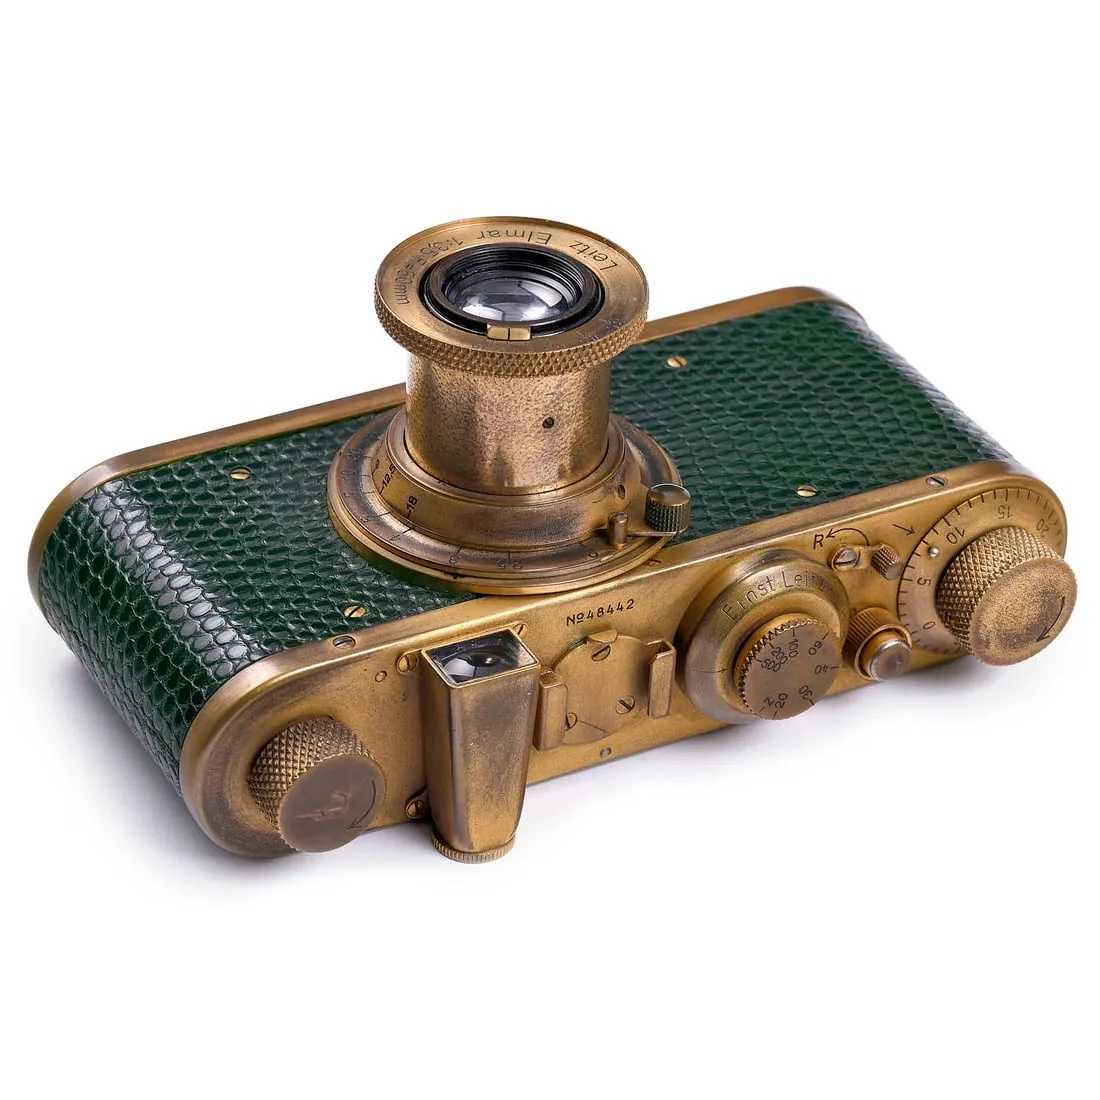 Leica ‘Luxus’ 1 camera, which sold for €150,000 ($162,390, or $201,040 with buyer’s premium) at Breker.